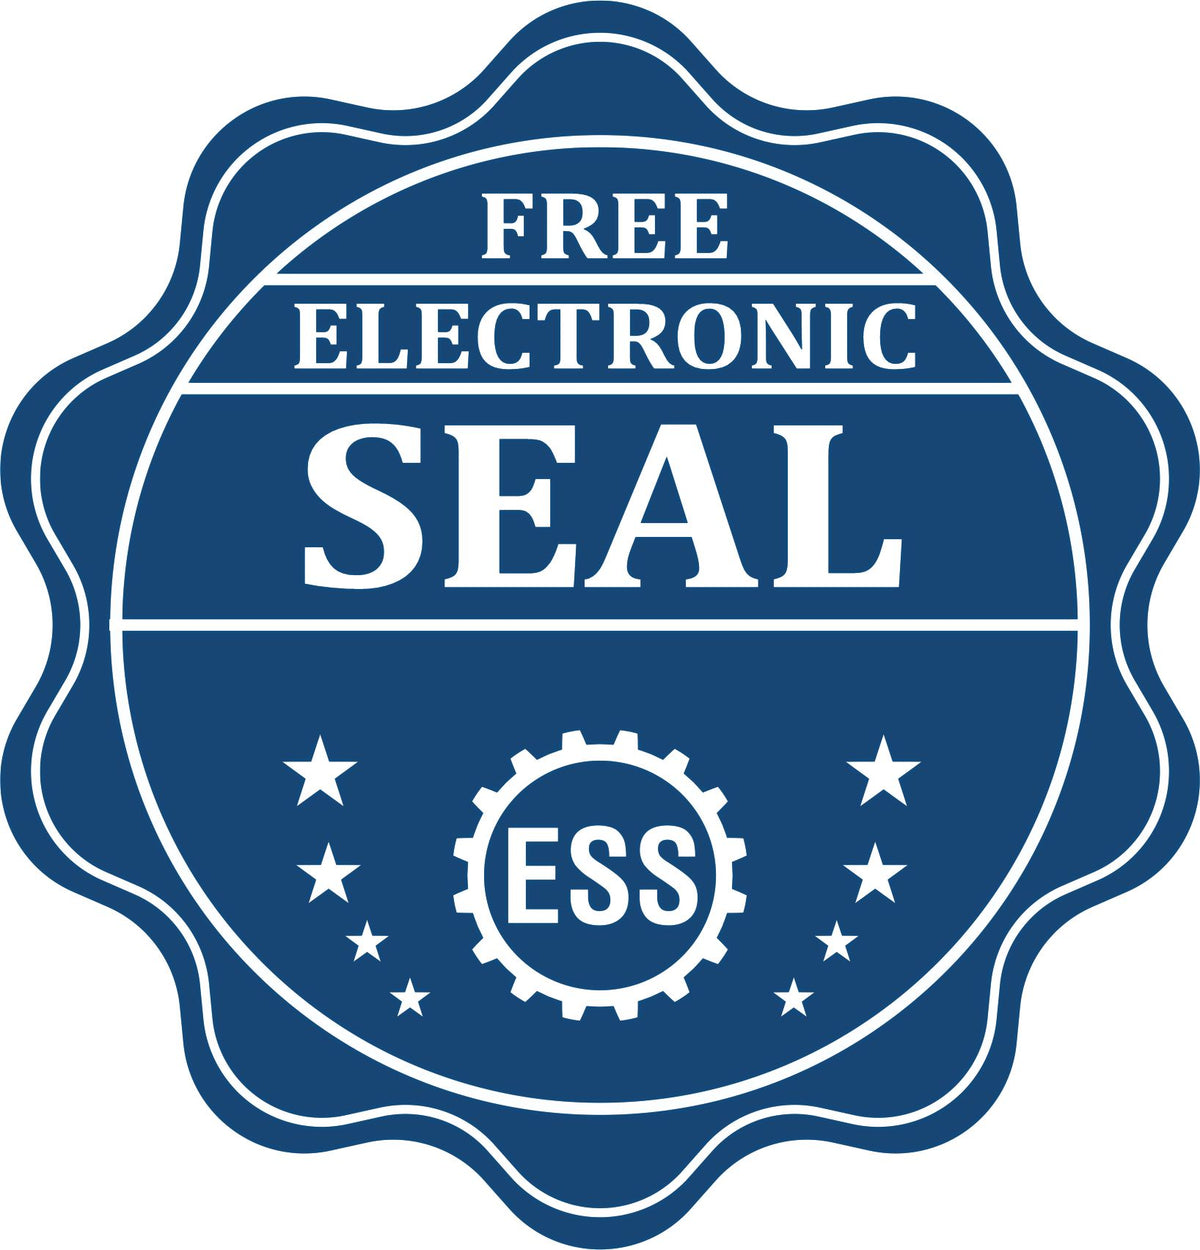 A badge showing a free electronic seal for the Hybrid Wyoming Geologist Seal with stars and the ESS gear on the emblem.